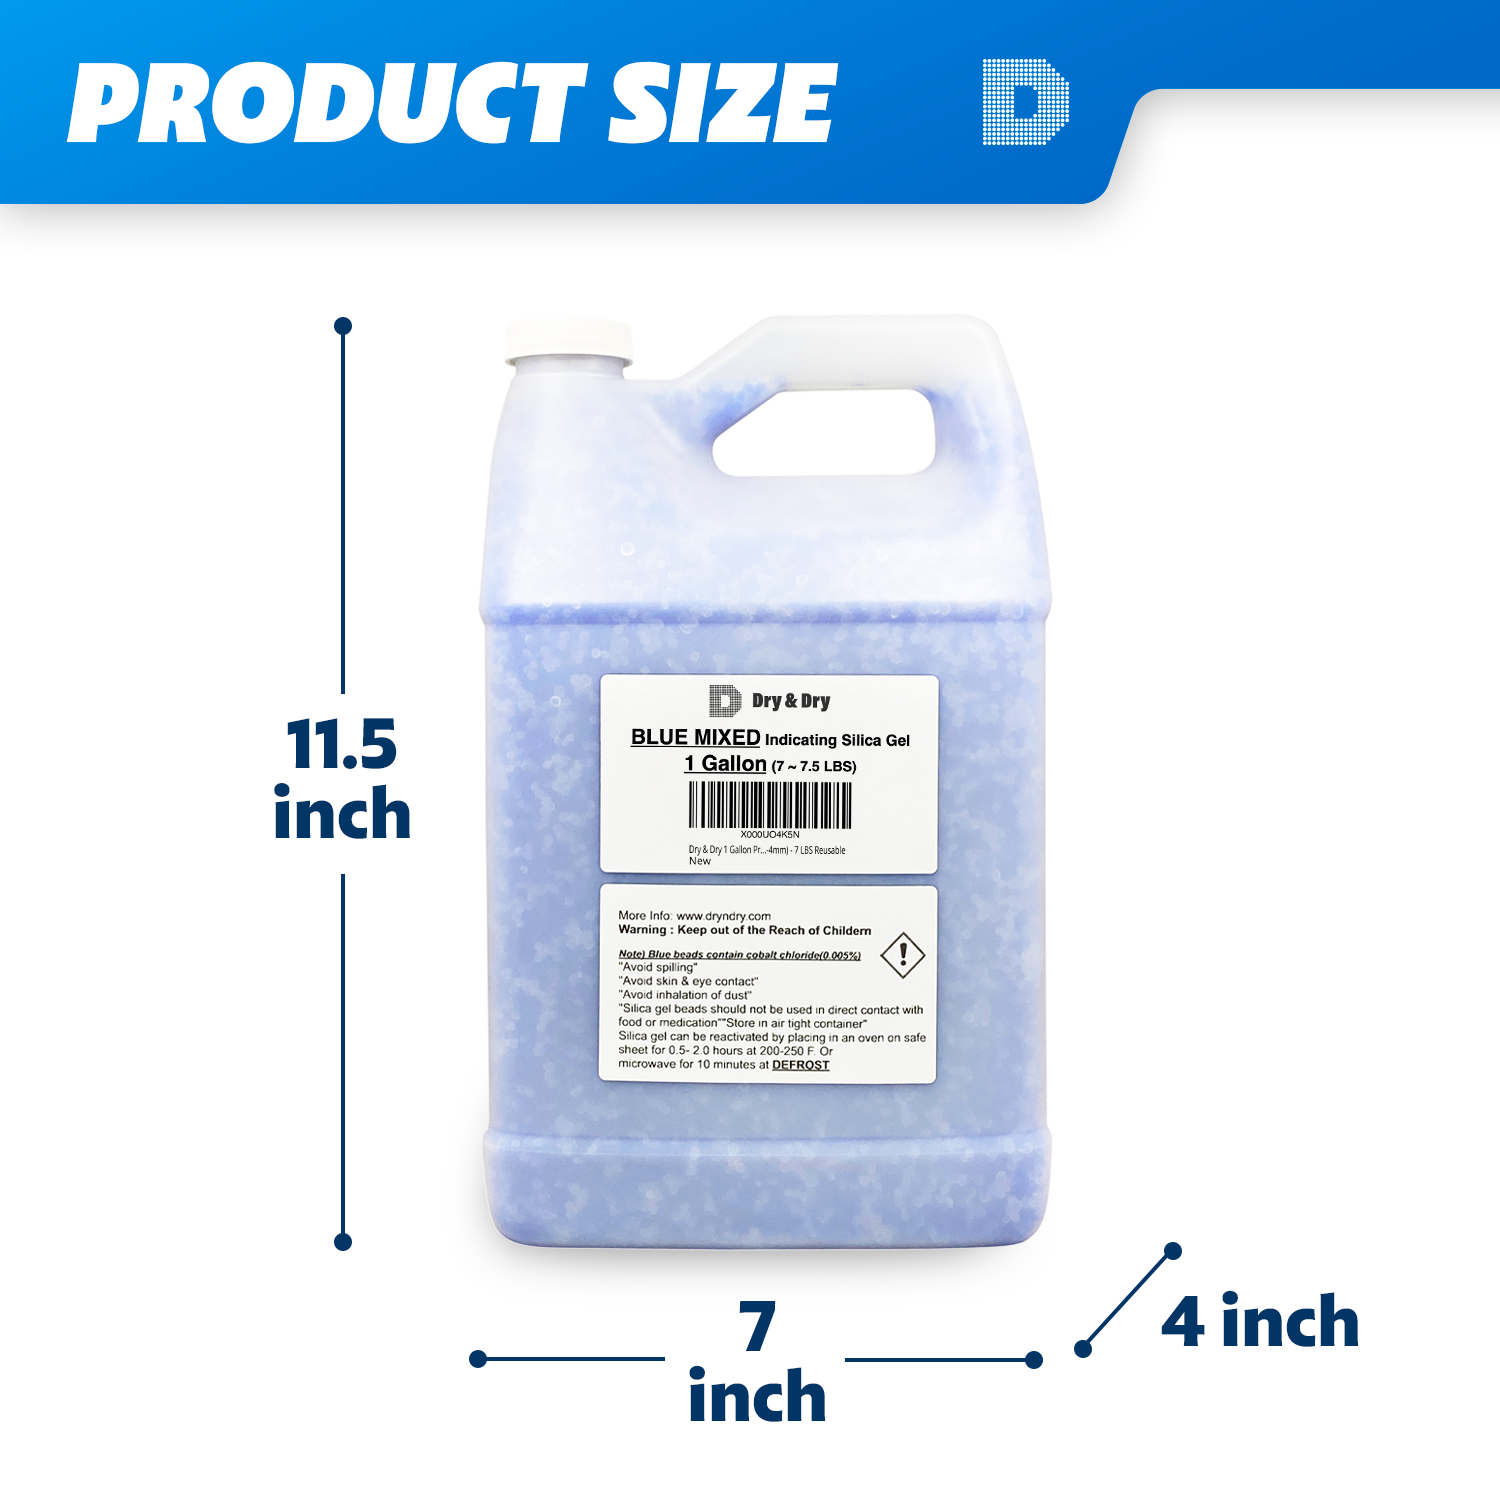 1 Gallon (7 LBS) "Dry & Dry" High Quality Mixed Blue & White Silica Gel Desiccant Beads